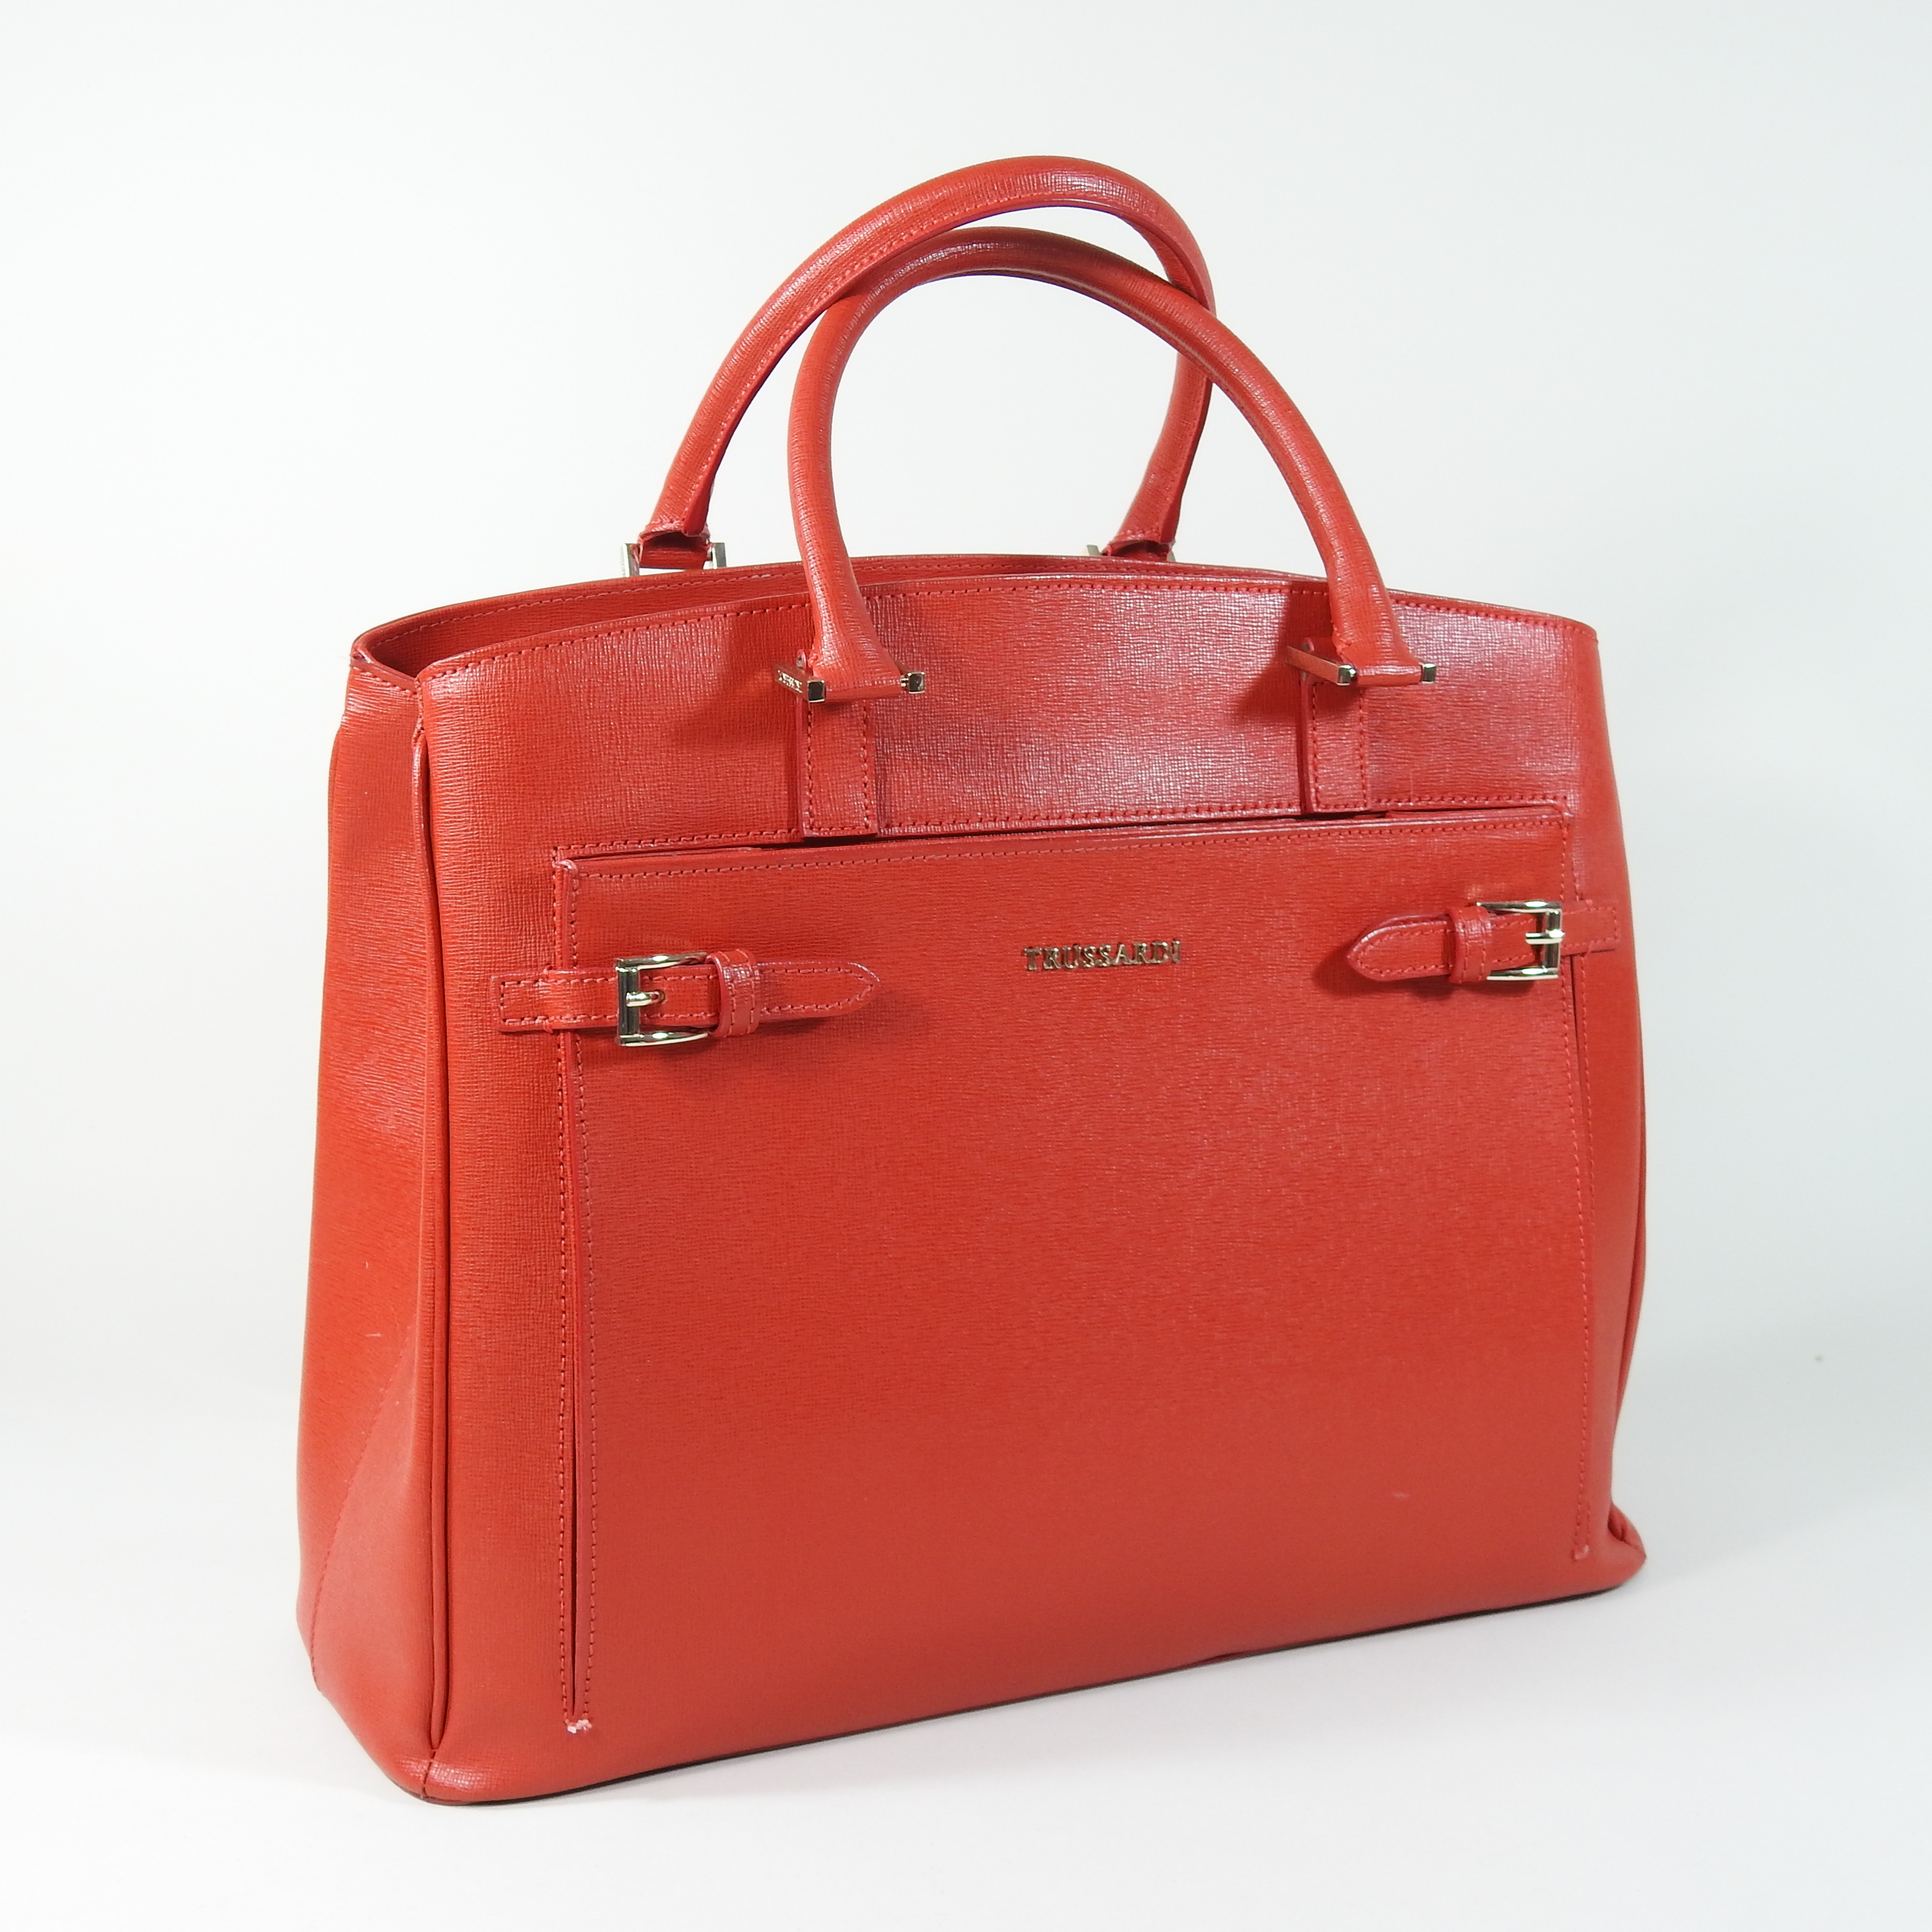 A Trussardi red leather handbag, decorated with buckles,